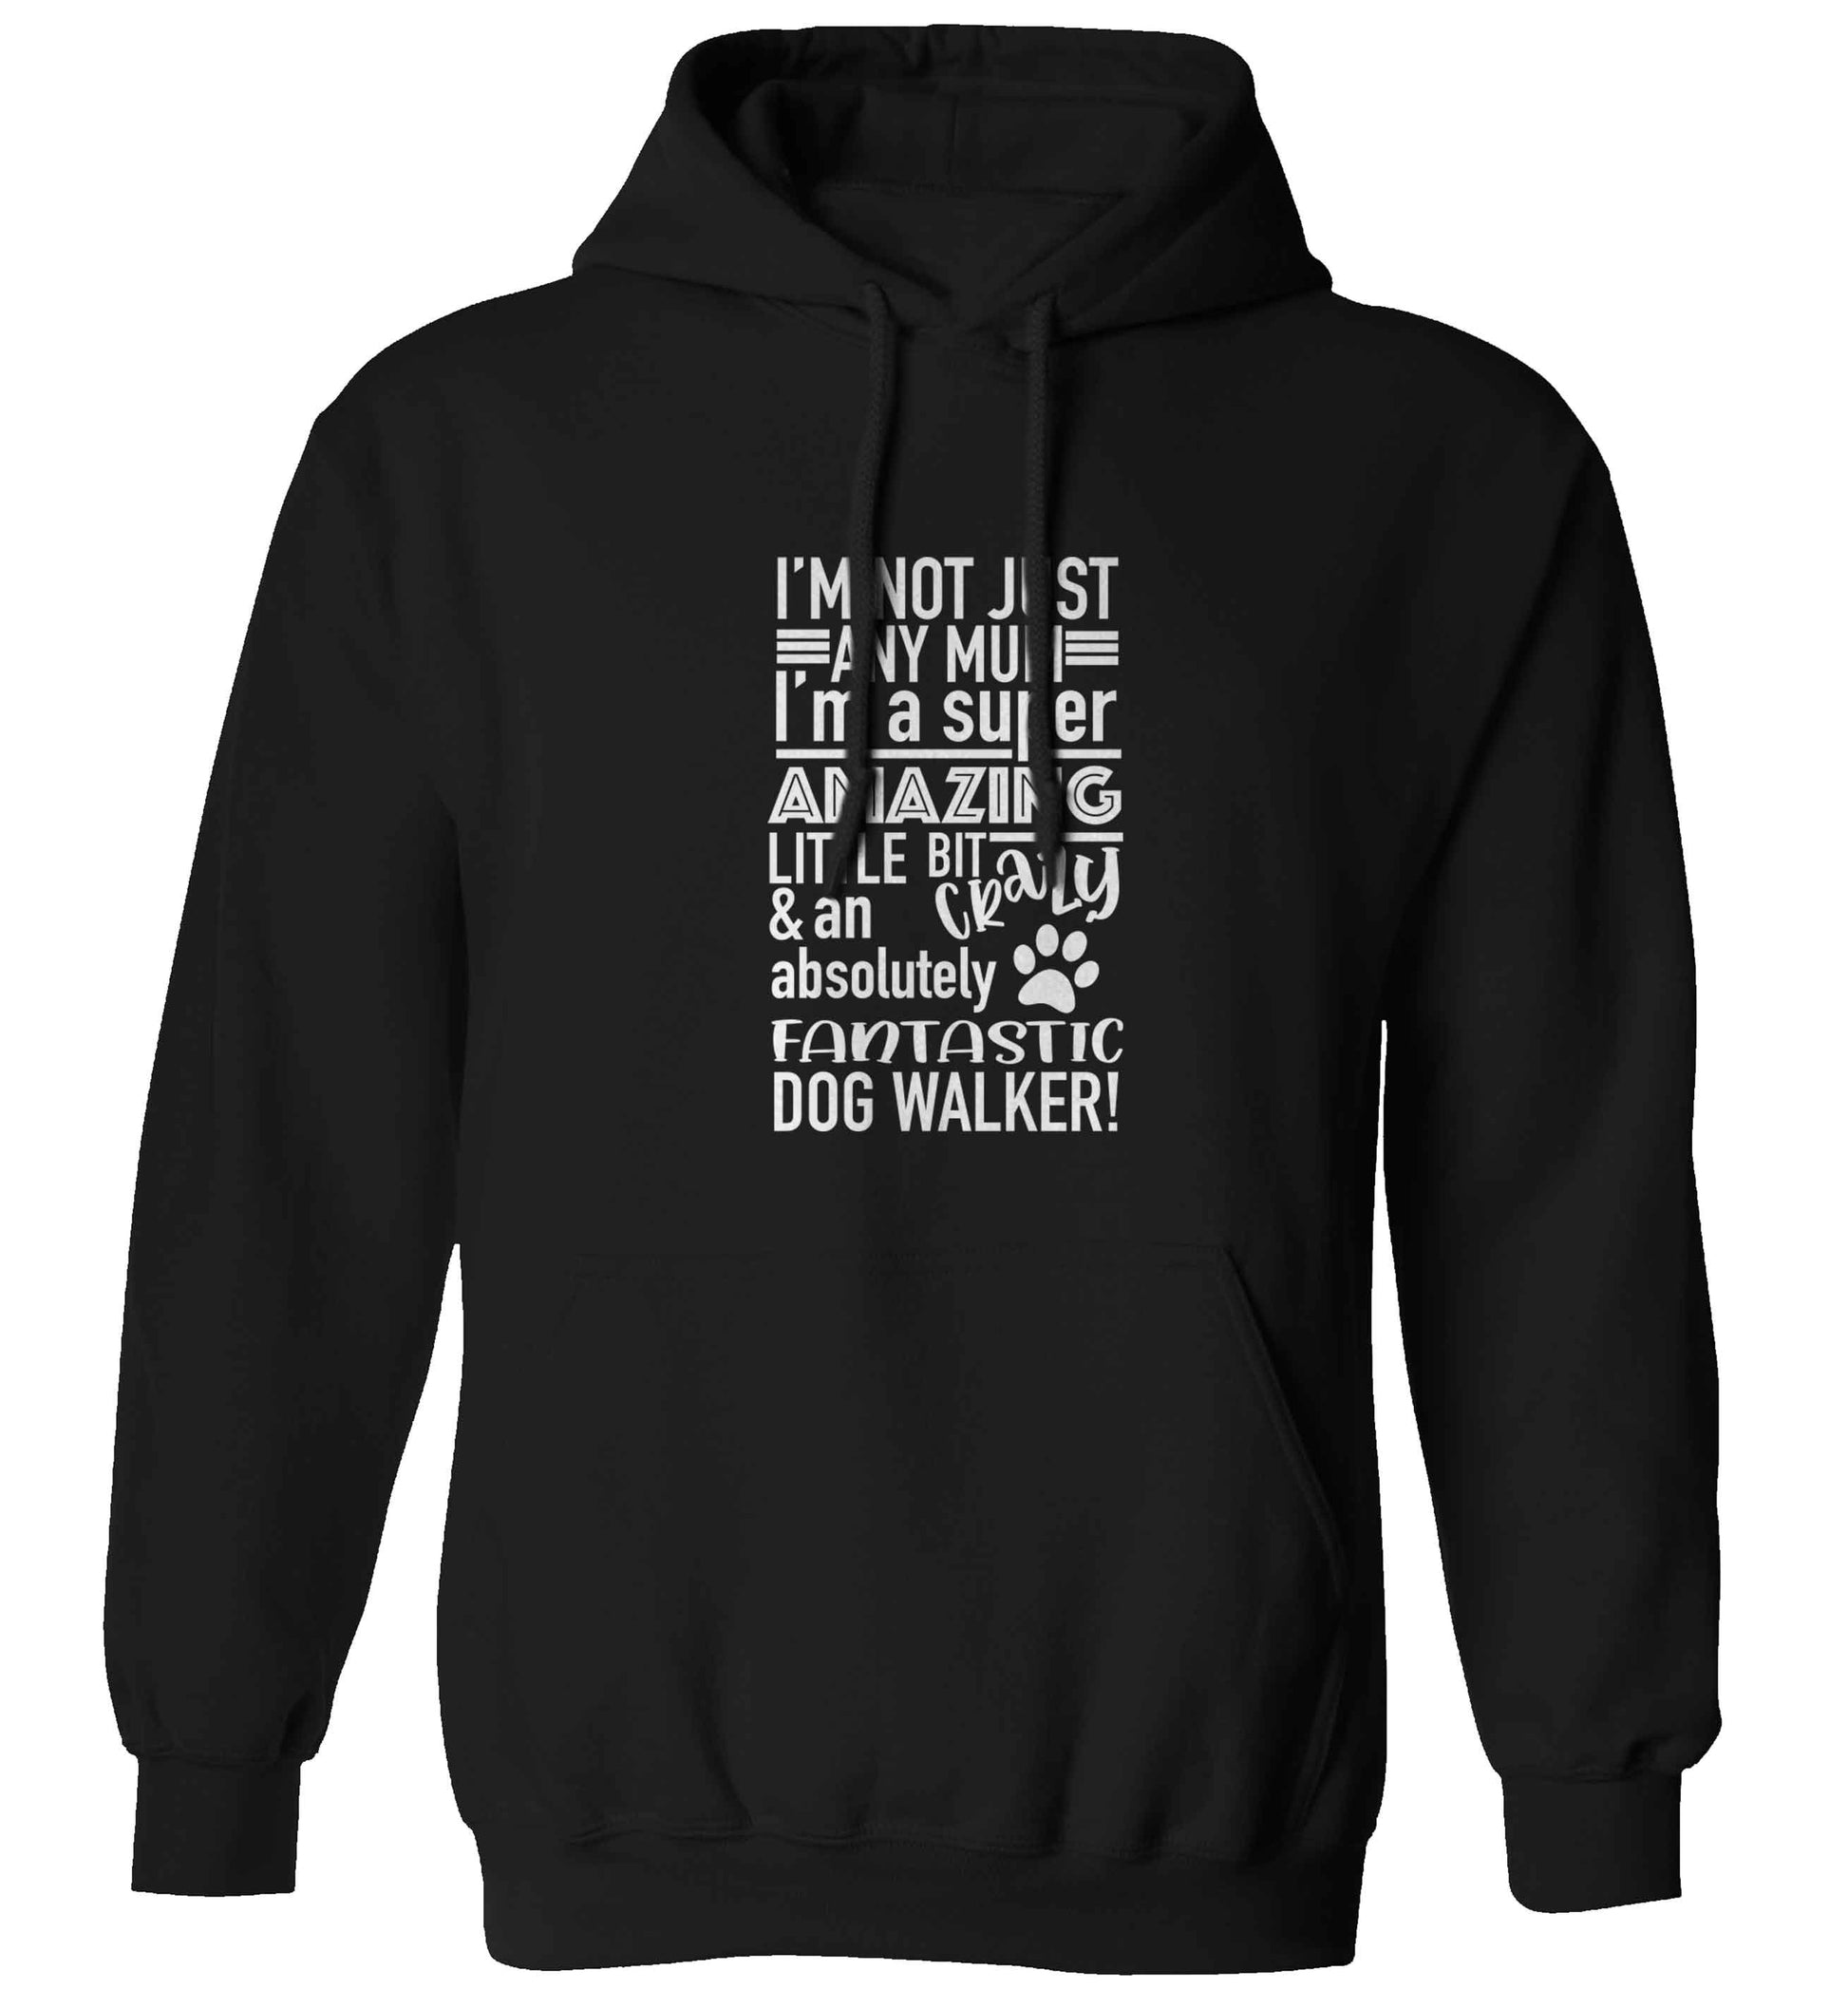 I'm not just any mum I'm a super amazing little bit crazy and an absolutely fantastic dog walker! adults unisex black hoodie 2XL